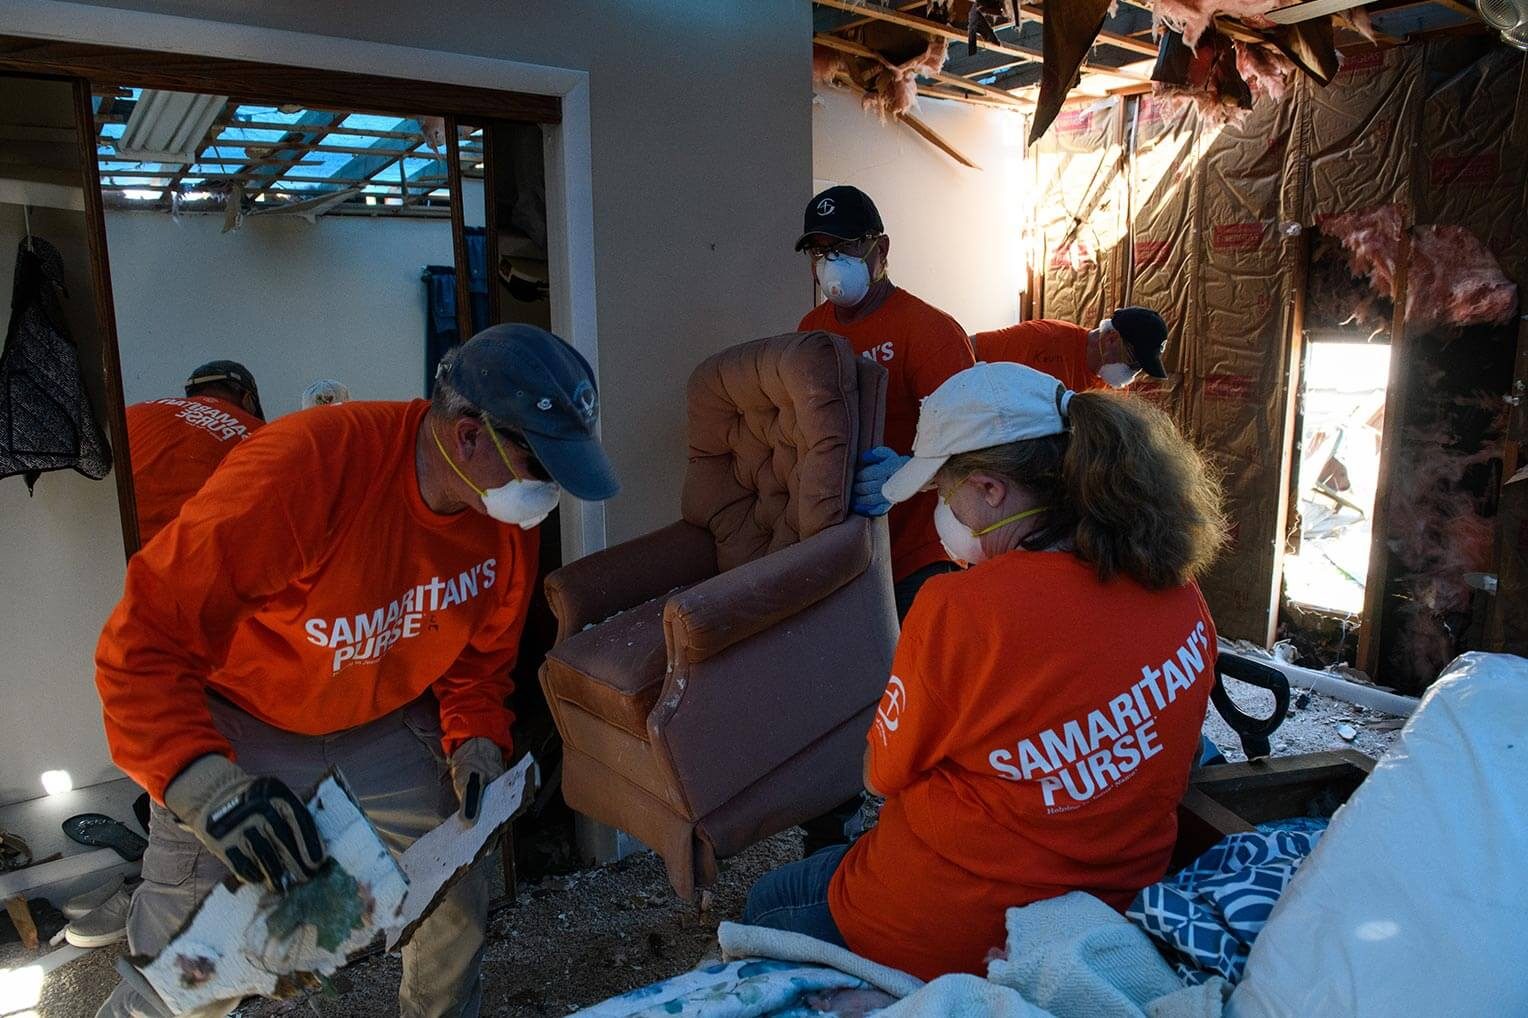 Volunteers take the time to salvage homeowners' belongings as they sift through the wreckage.